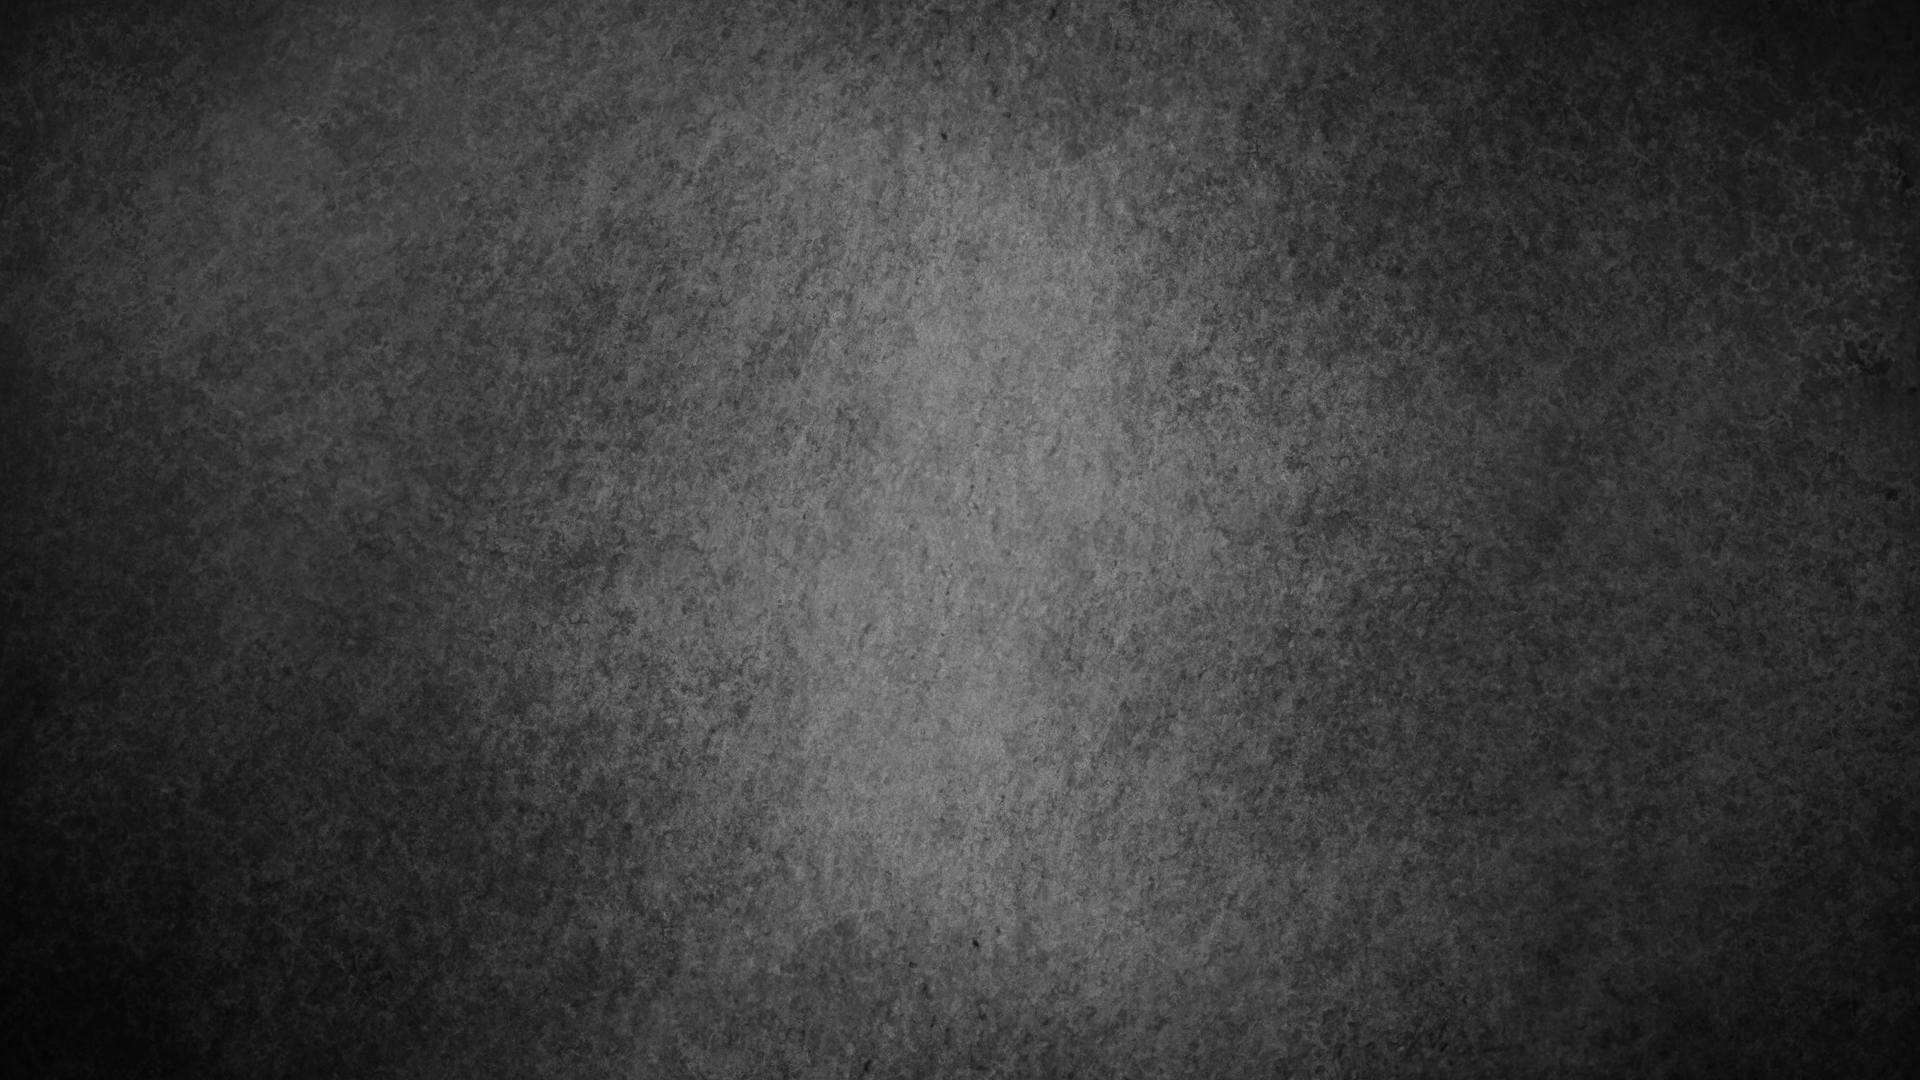 Similiar Black And Grey Textured Background